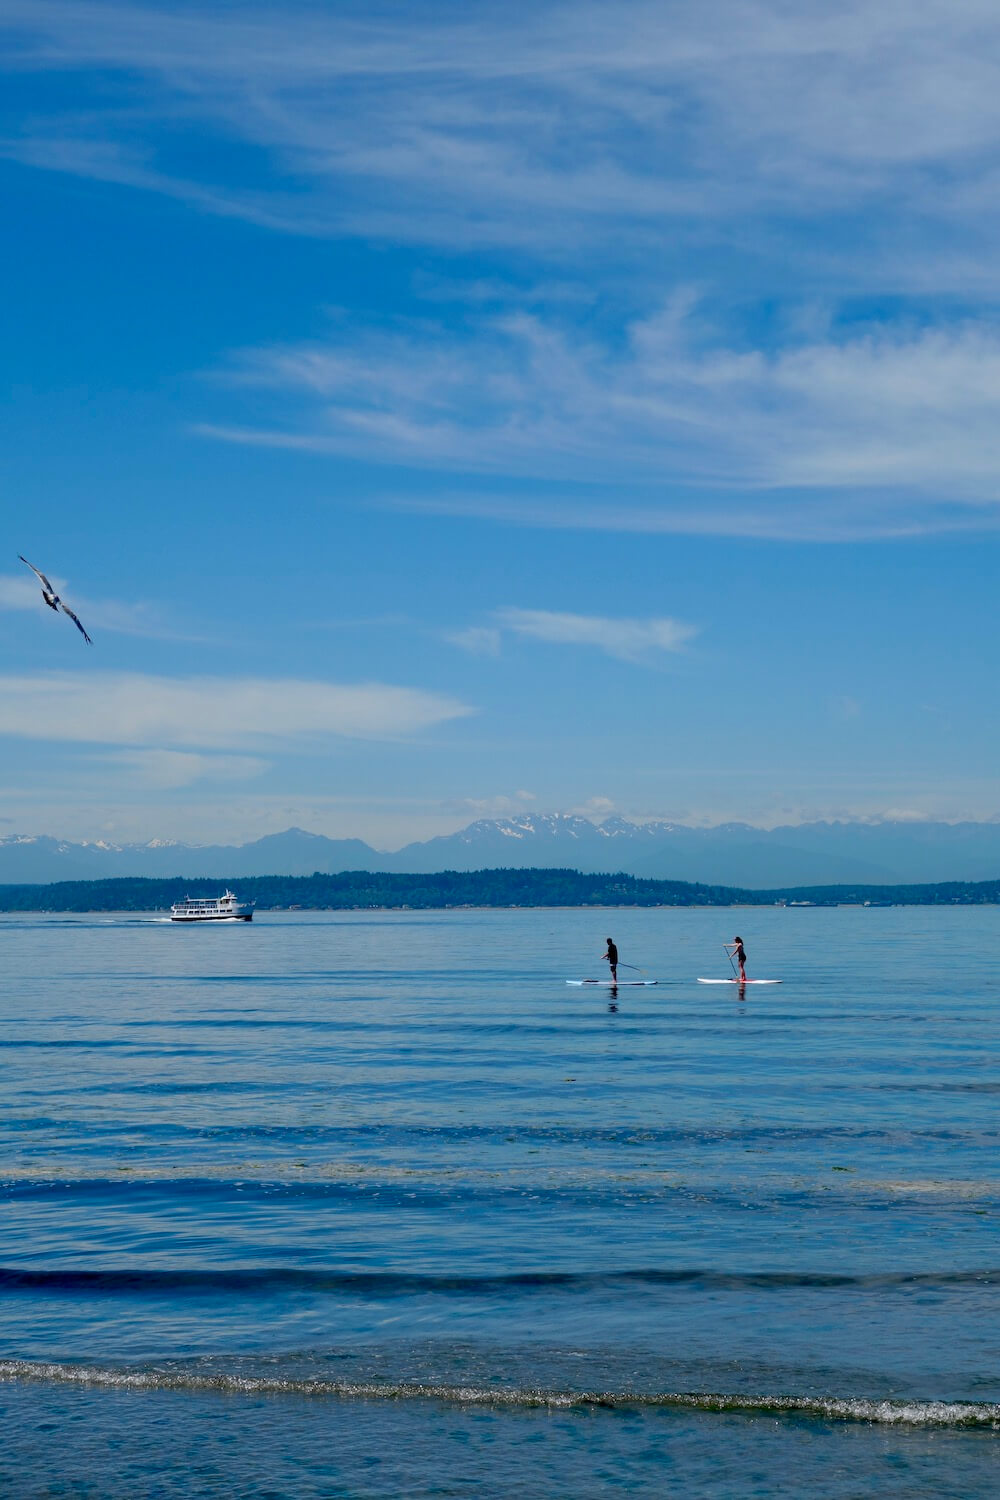 Seattle outdoors in the Summer has many things to do. Here, two paddle boarders are riding through the rolling blue waves of the Salish Sea as a small tour boat is cruising through the water with the Olympic Mountains rising up in the background.